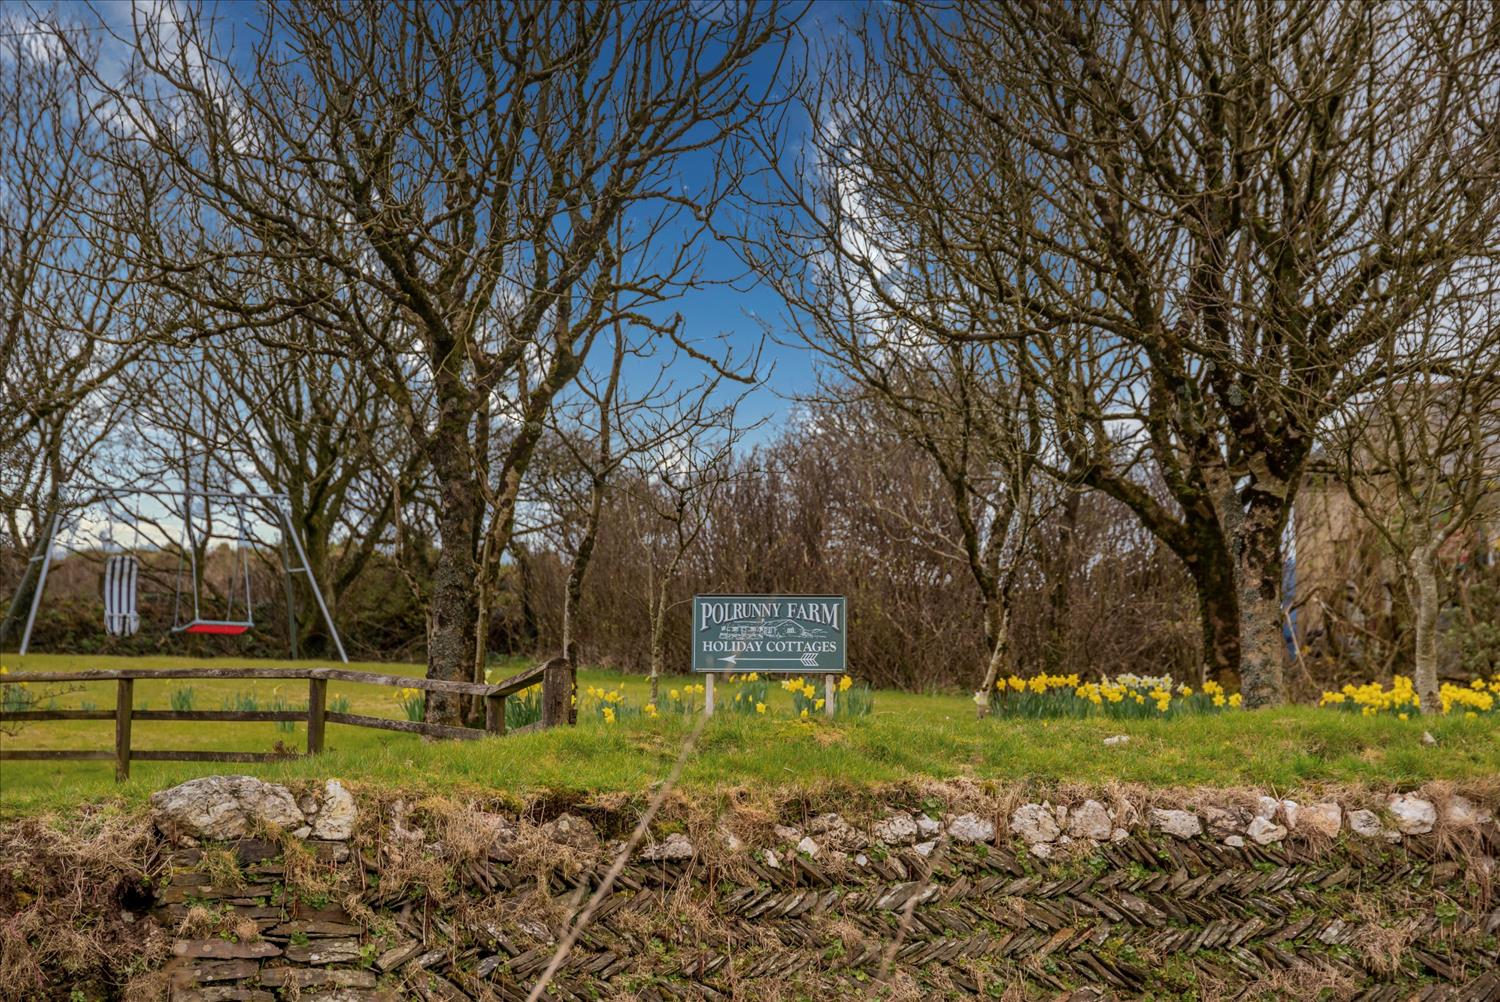 Polrunny Farm's green sign stands proud on the grass amongst the daffodils in the farm garden, with the children's play equipment in the background